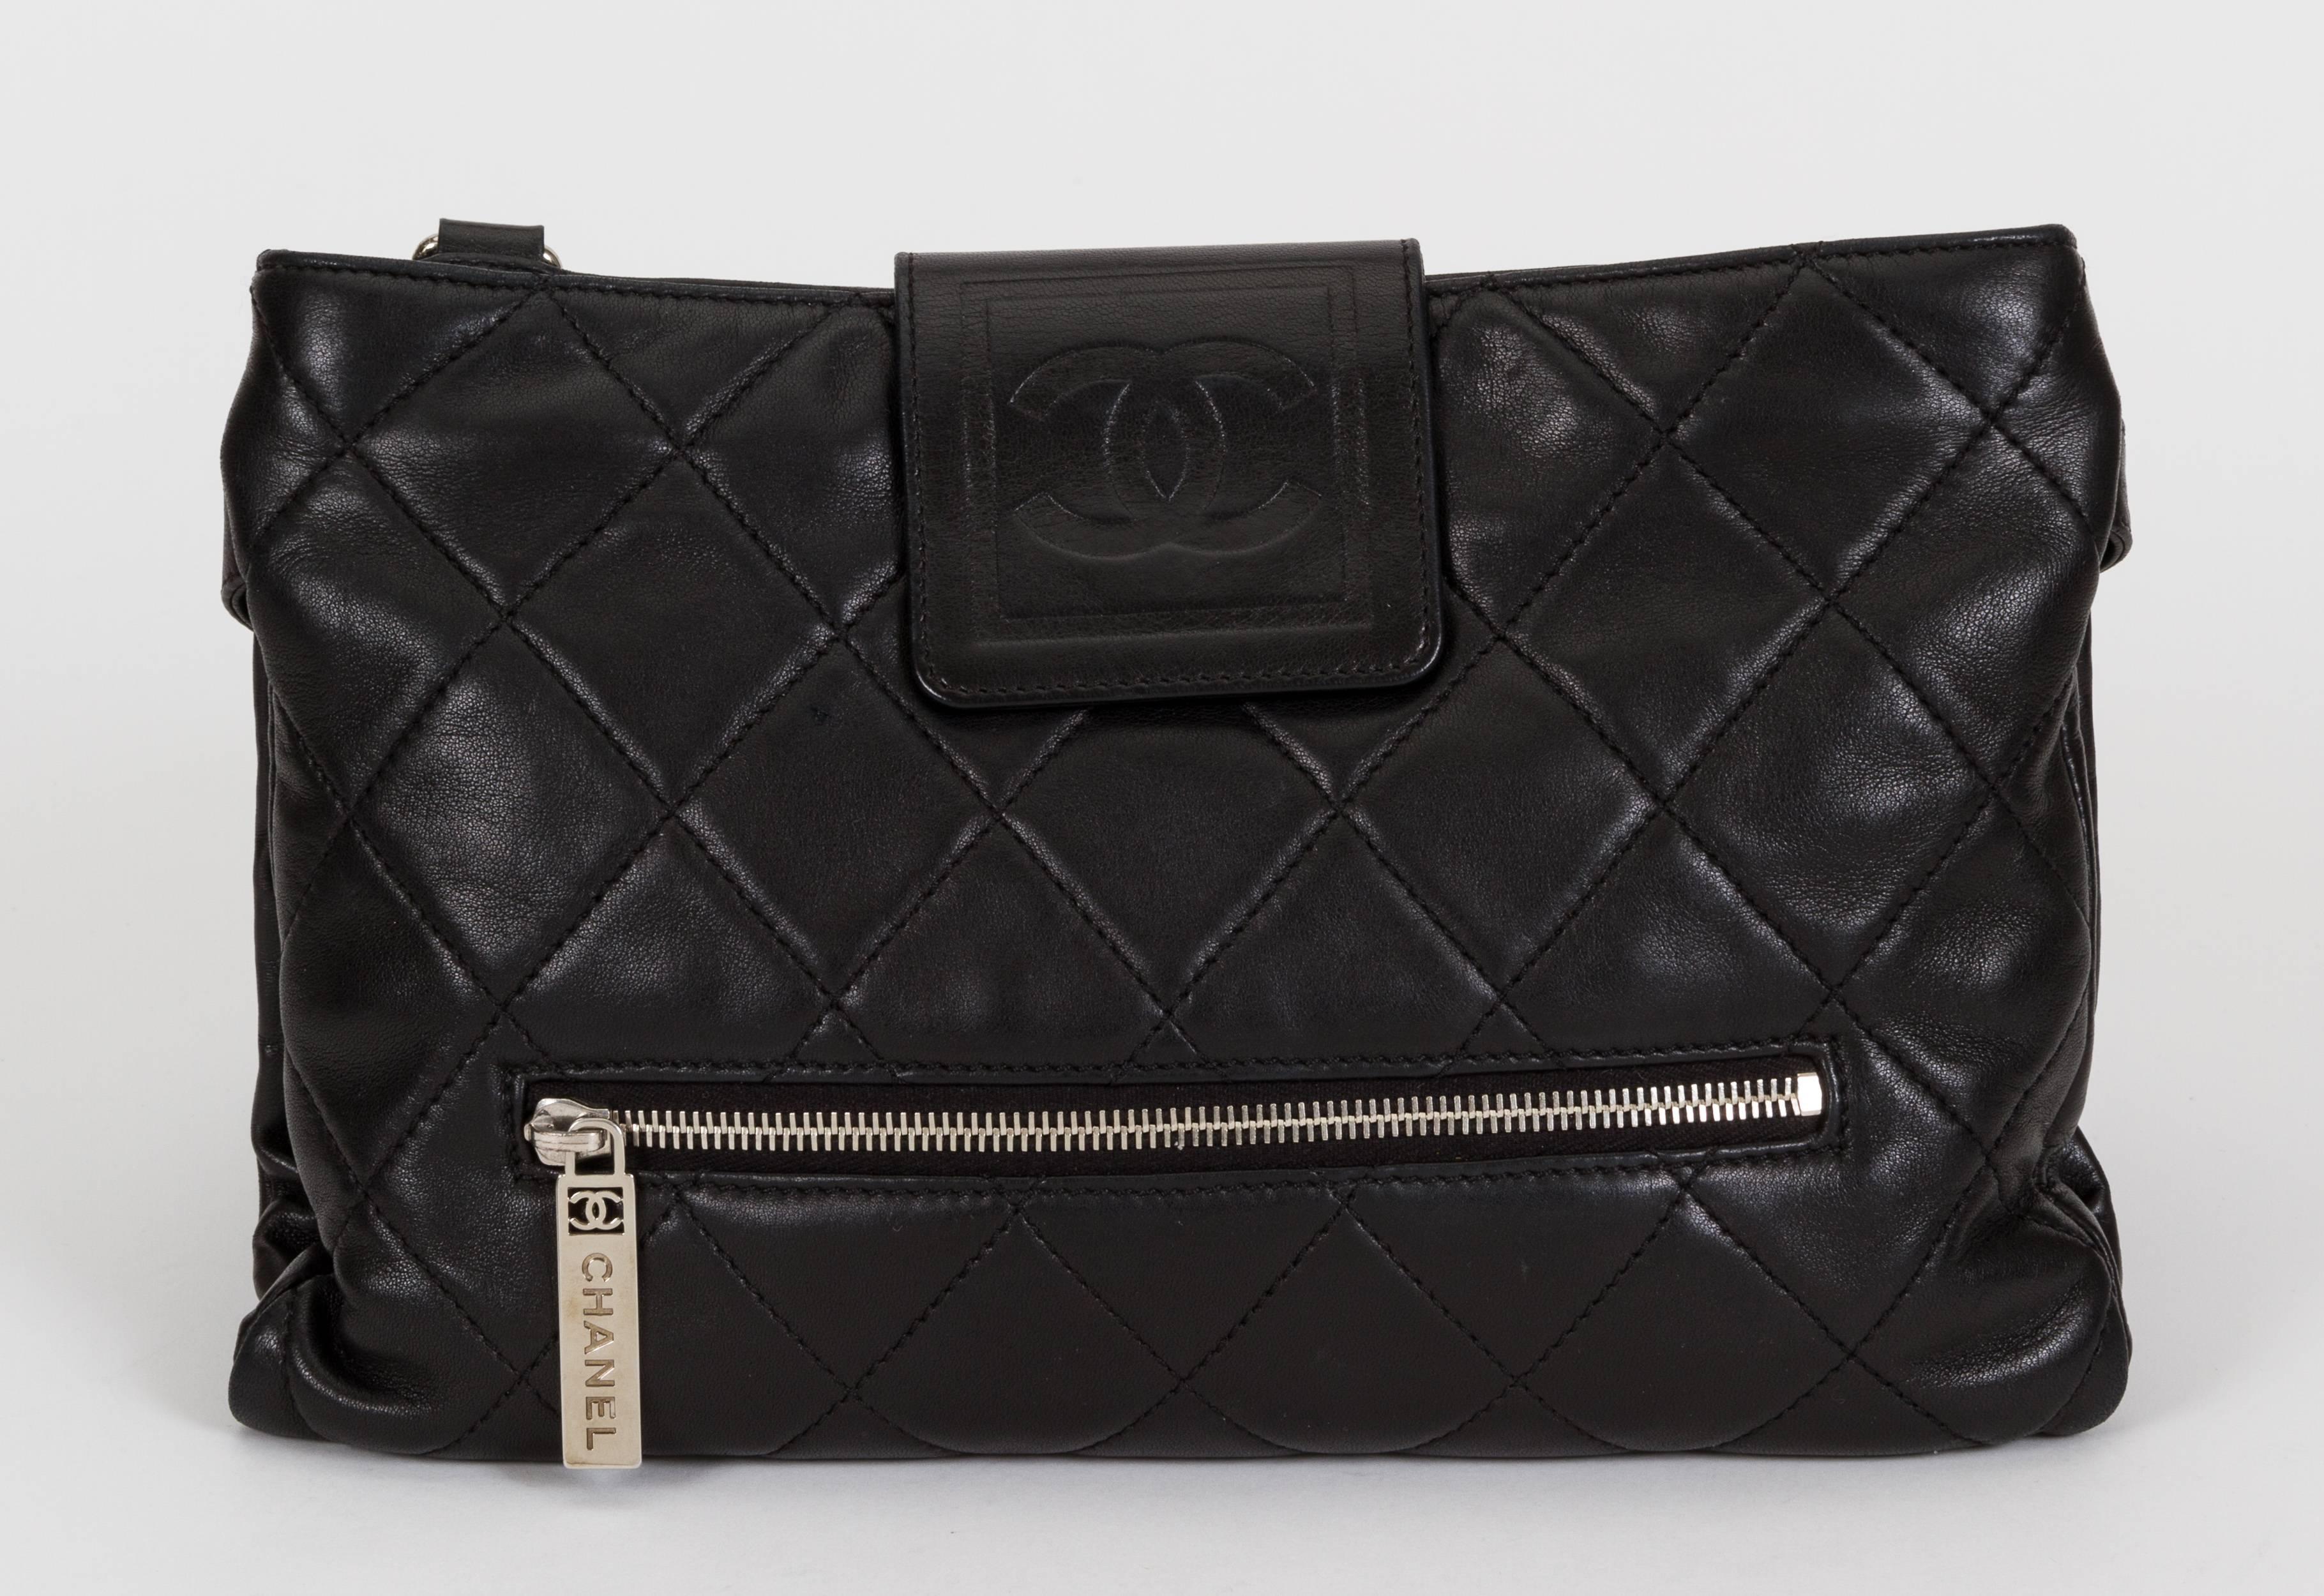 Chanel black lambskin quilted cross body bag. 5 zipped compartments. The bag opens flat with two snaps. Collection 2008/2009. Comes with hologram and id card. Minor wear.
